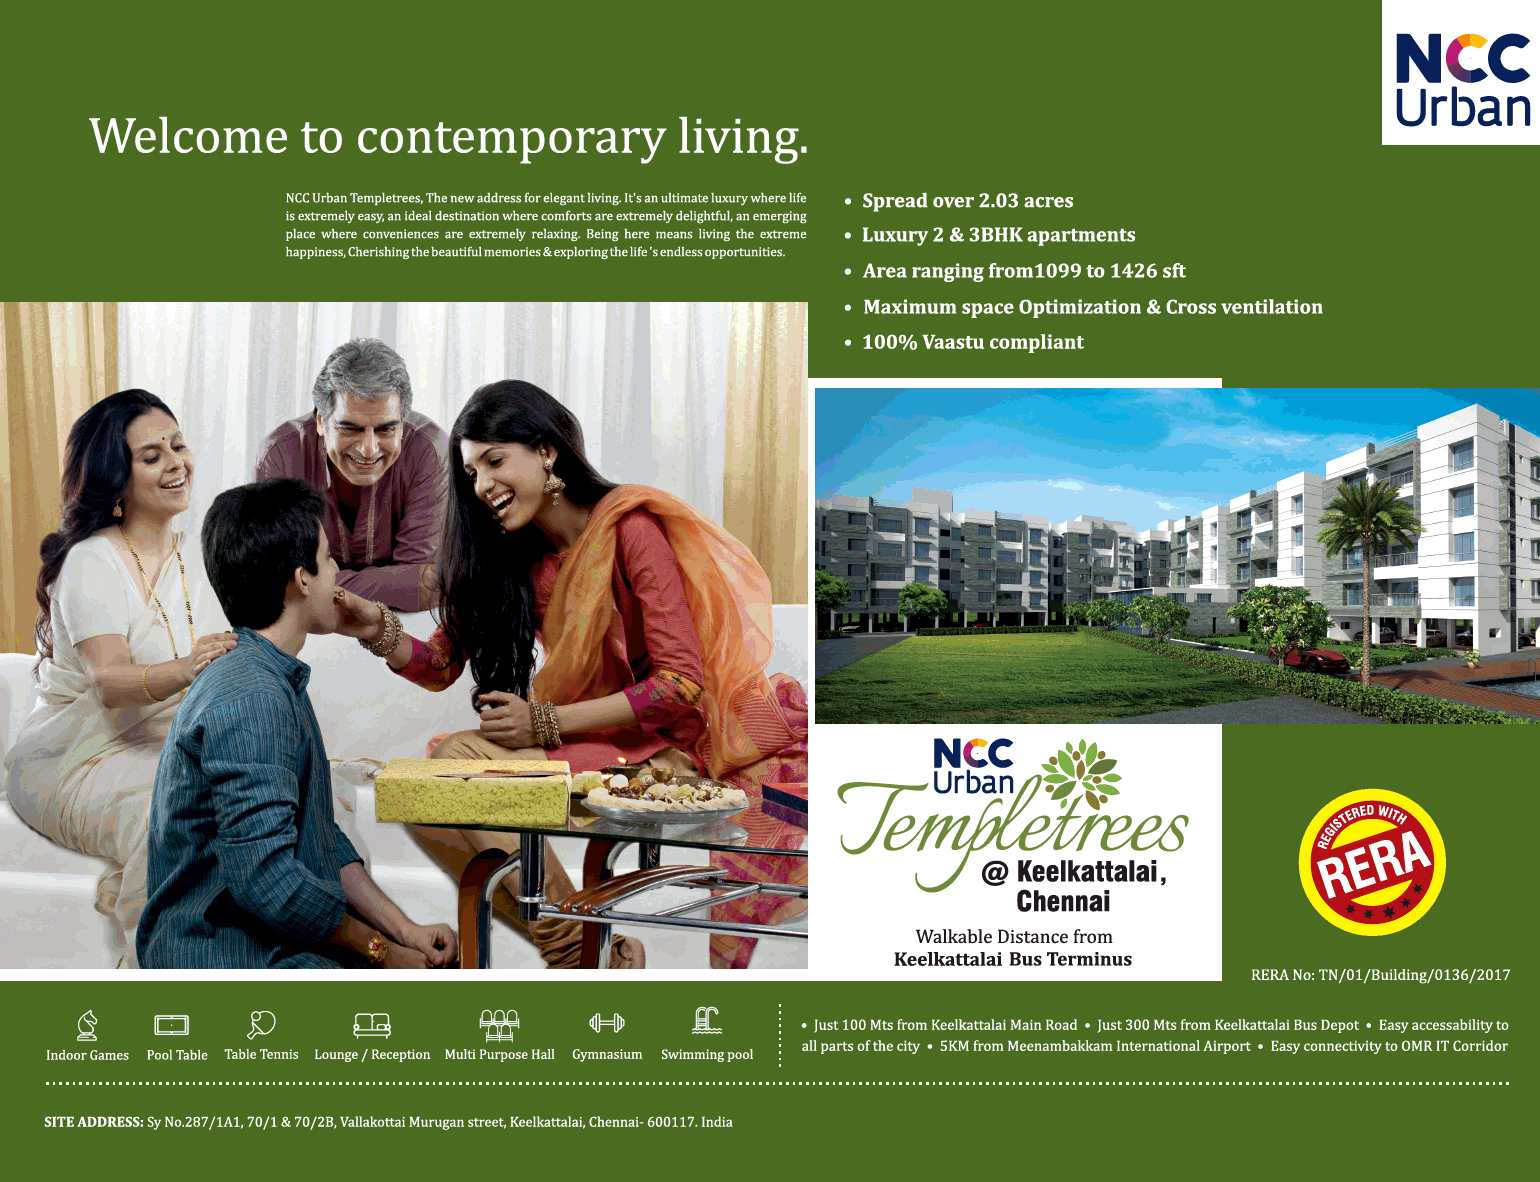 Explore life's endless opportunities by residing at NCC Urban Templetrees in Chennai Update